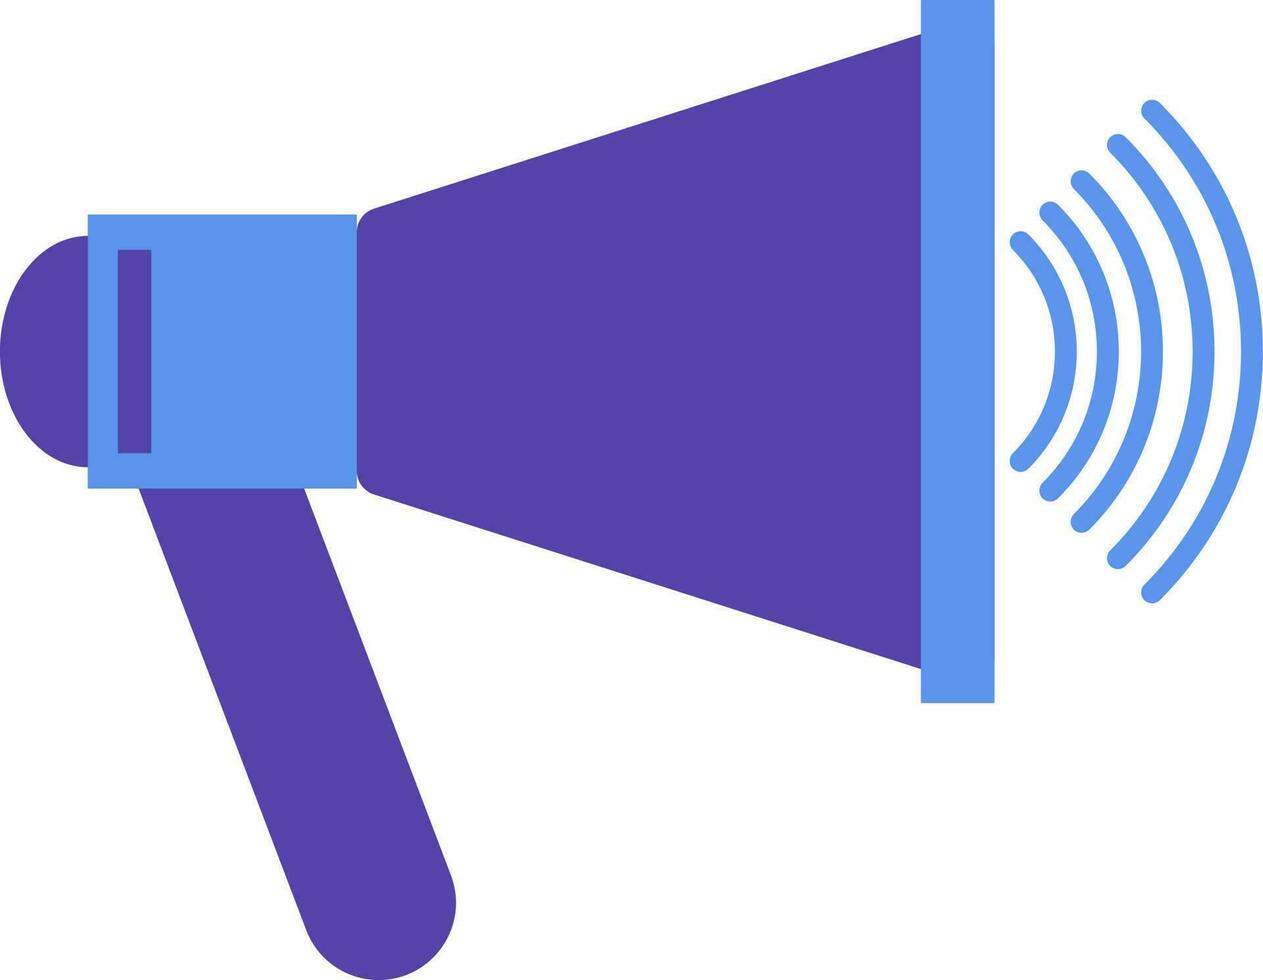 Megaphone icon for speaking concept. vector